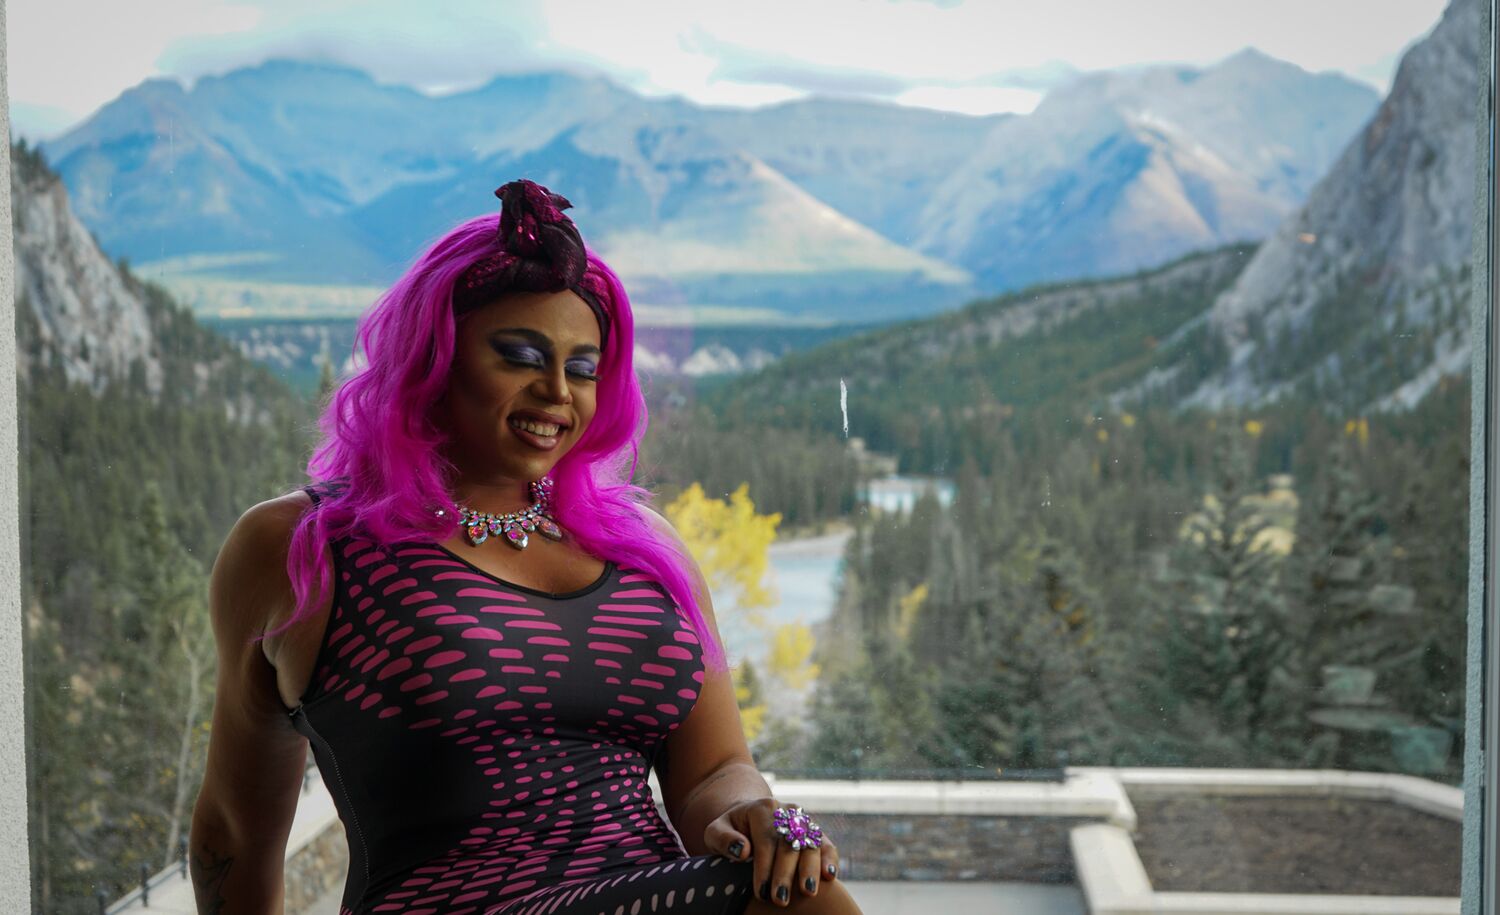 A drag queen at the Banff Springs Hotel in Banff National Park.